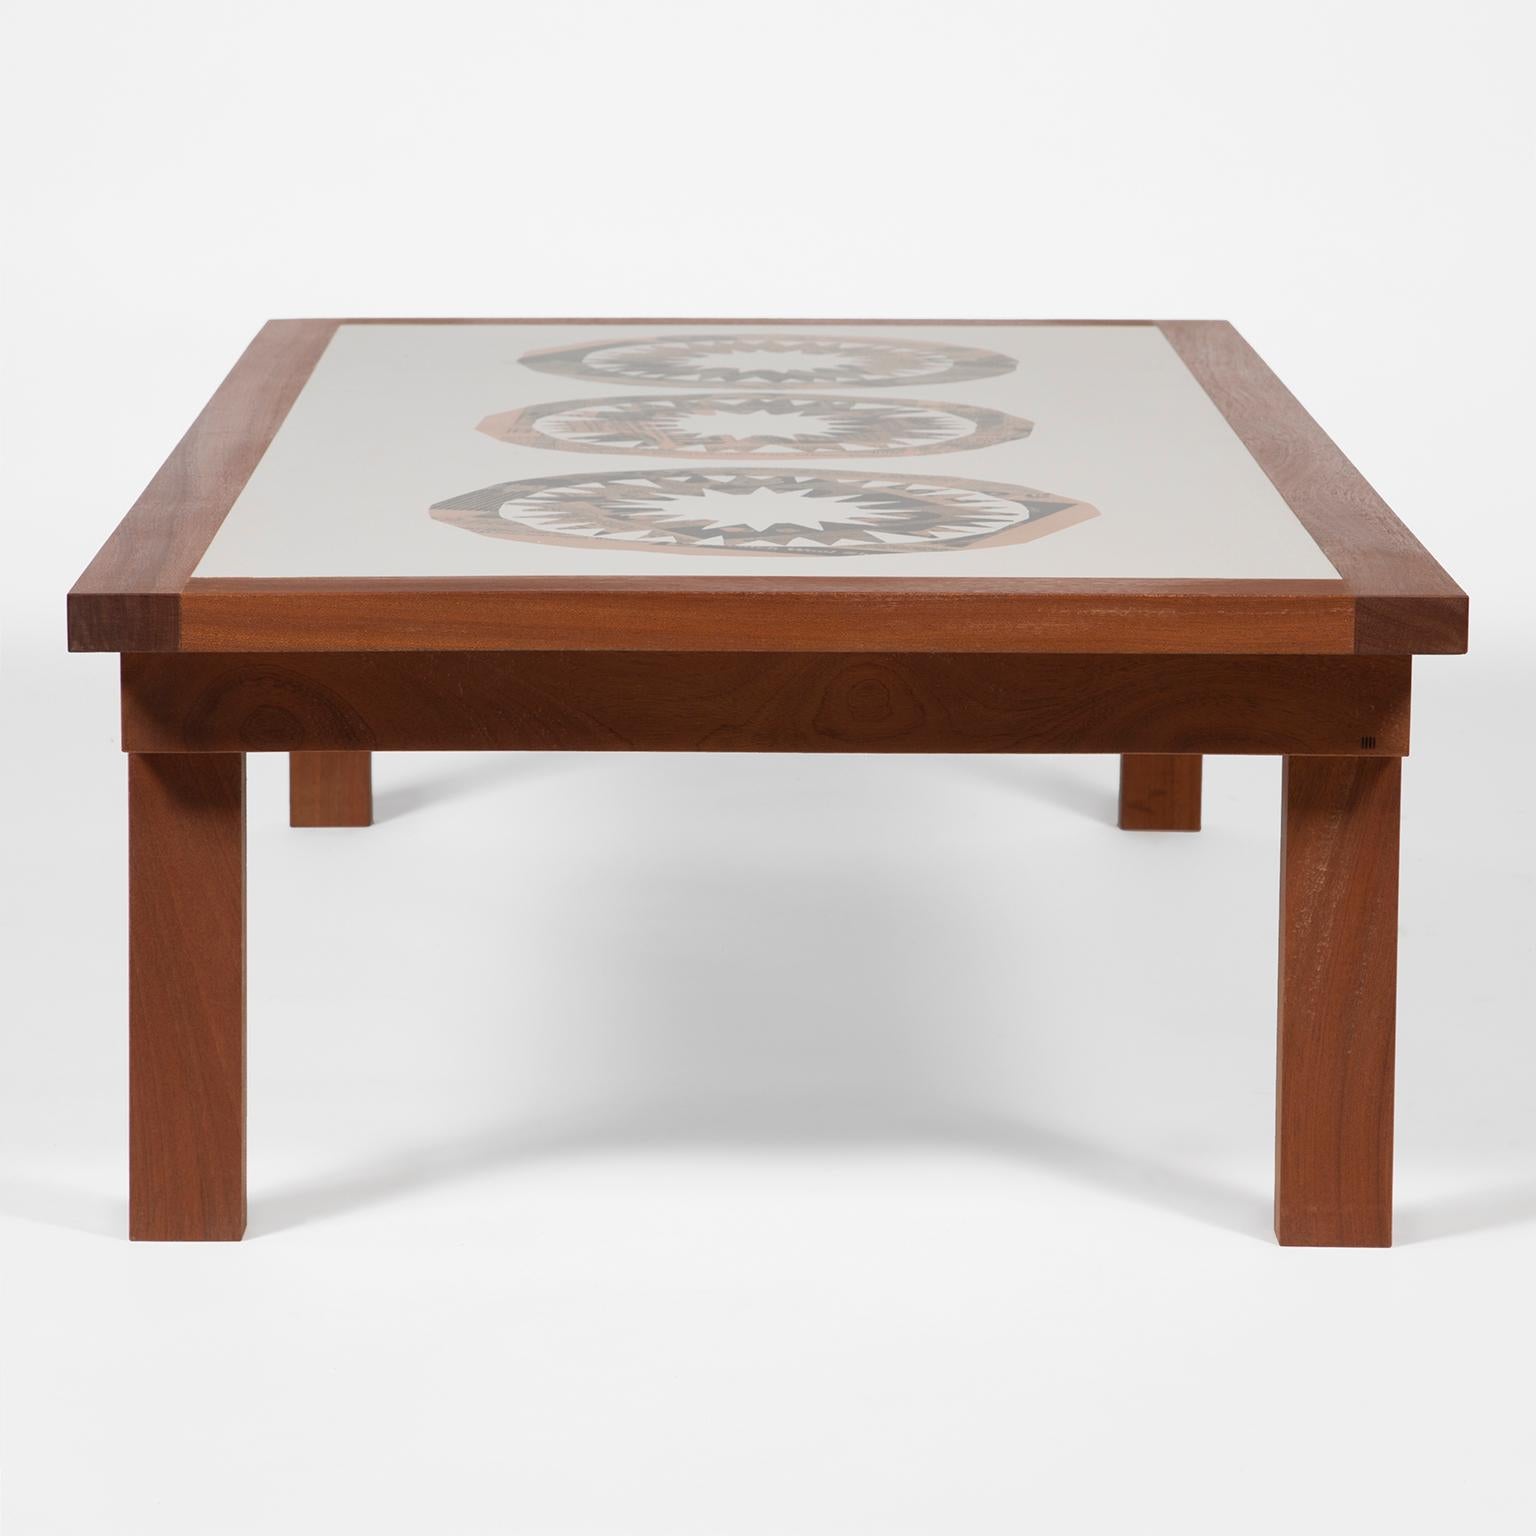 Laminate Triple Star Table by DANAD Design 'Peter Blake', Contemporary For Sale